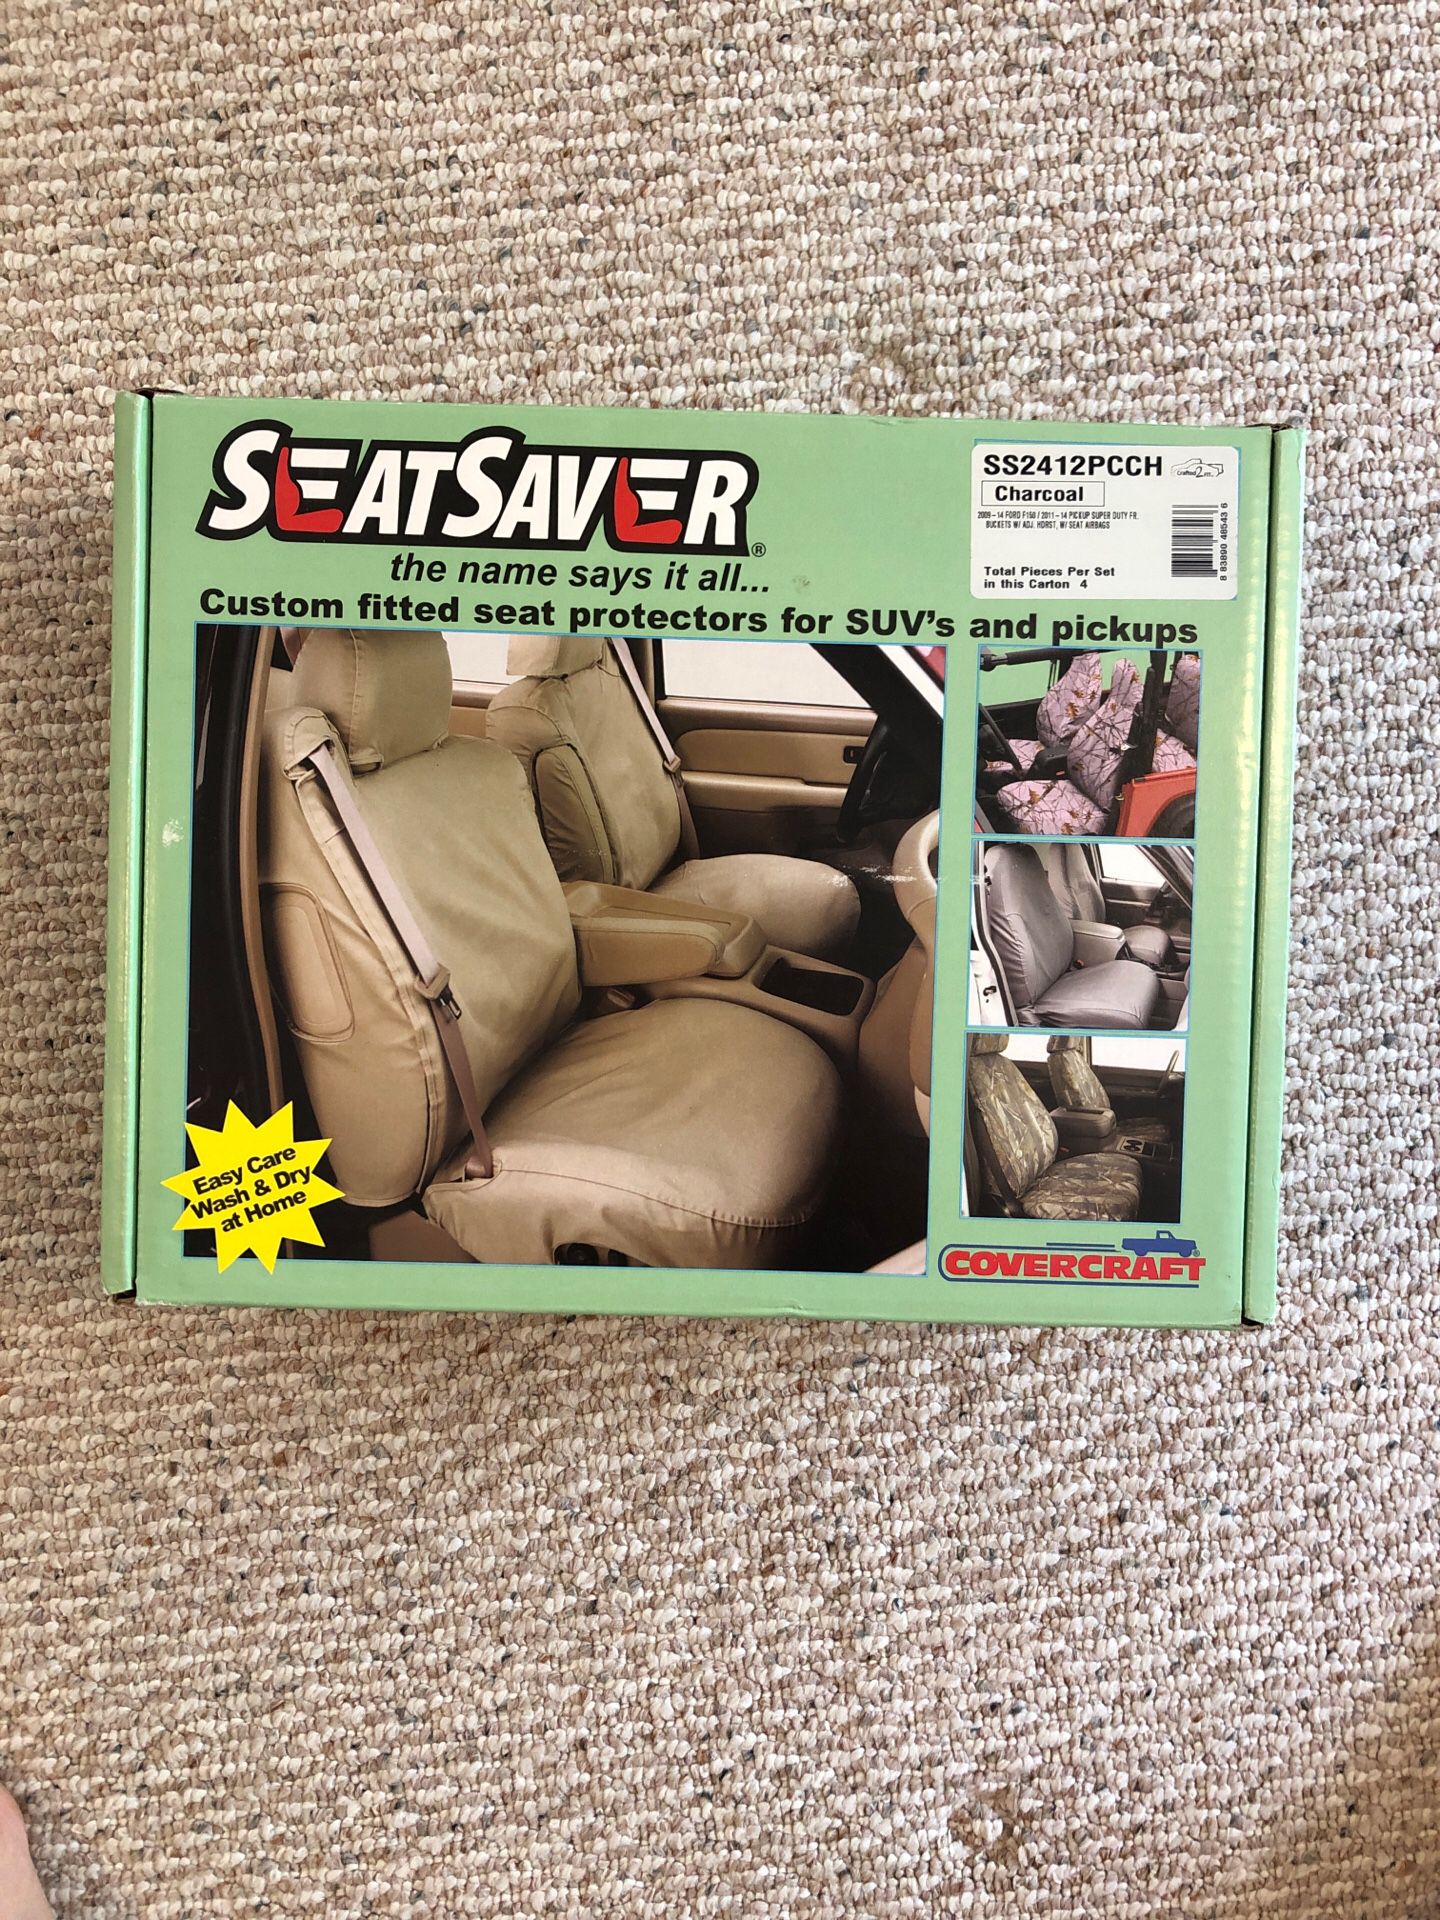 4 Seat covers for SUV or Truck